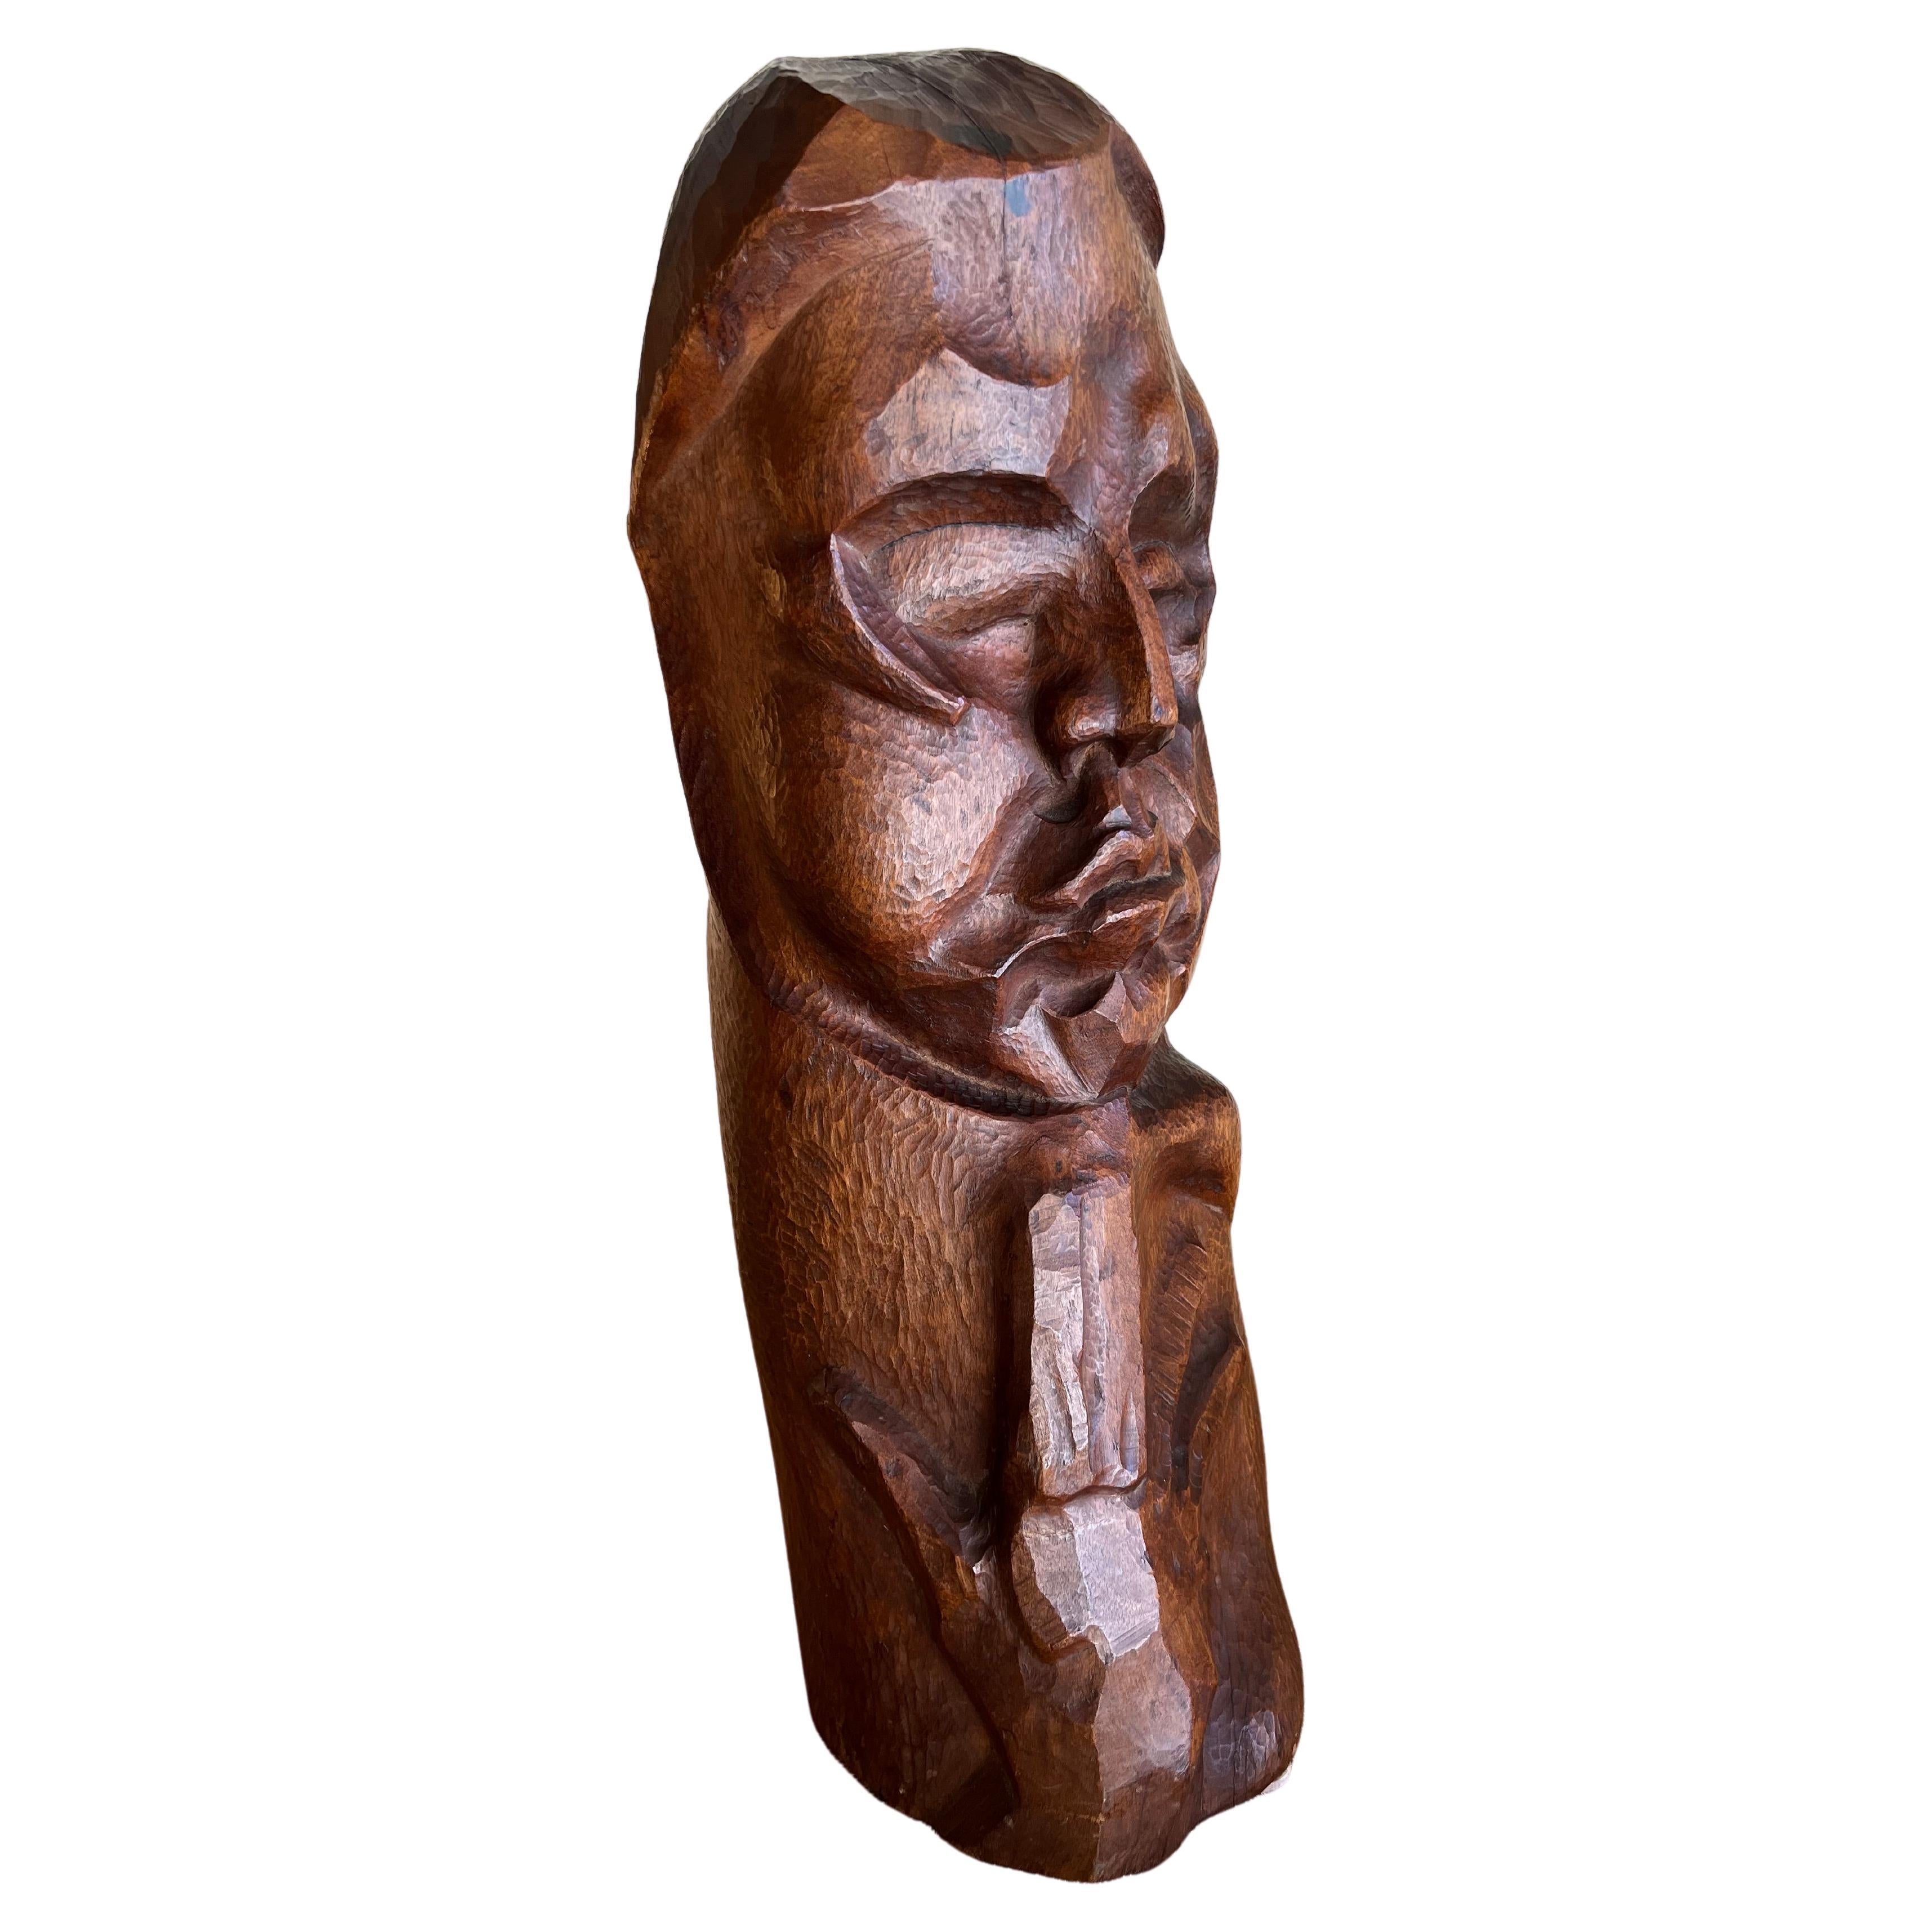 Man Bust Sculpture Signed Zolter, 1964 For Sale